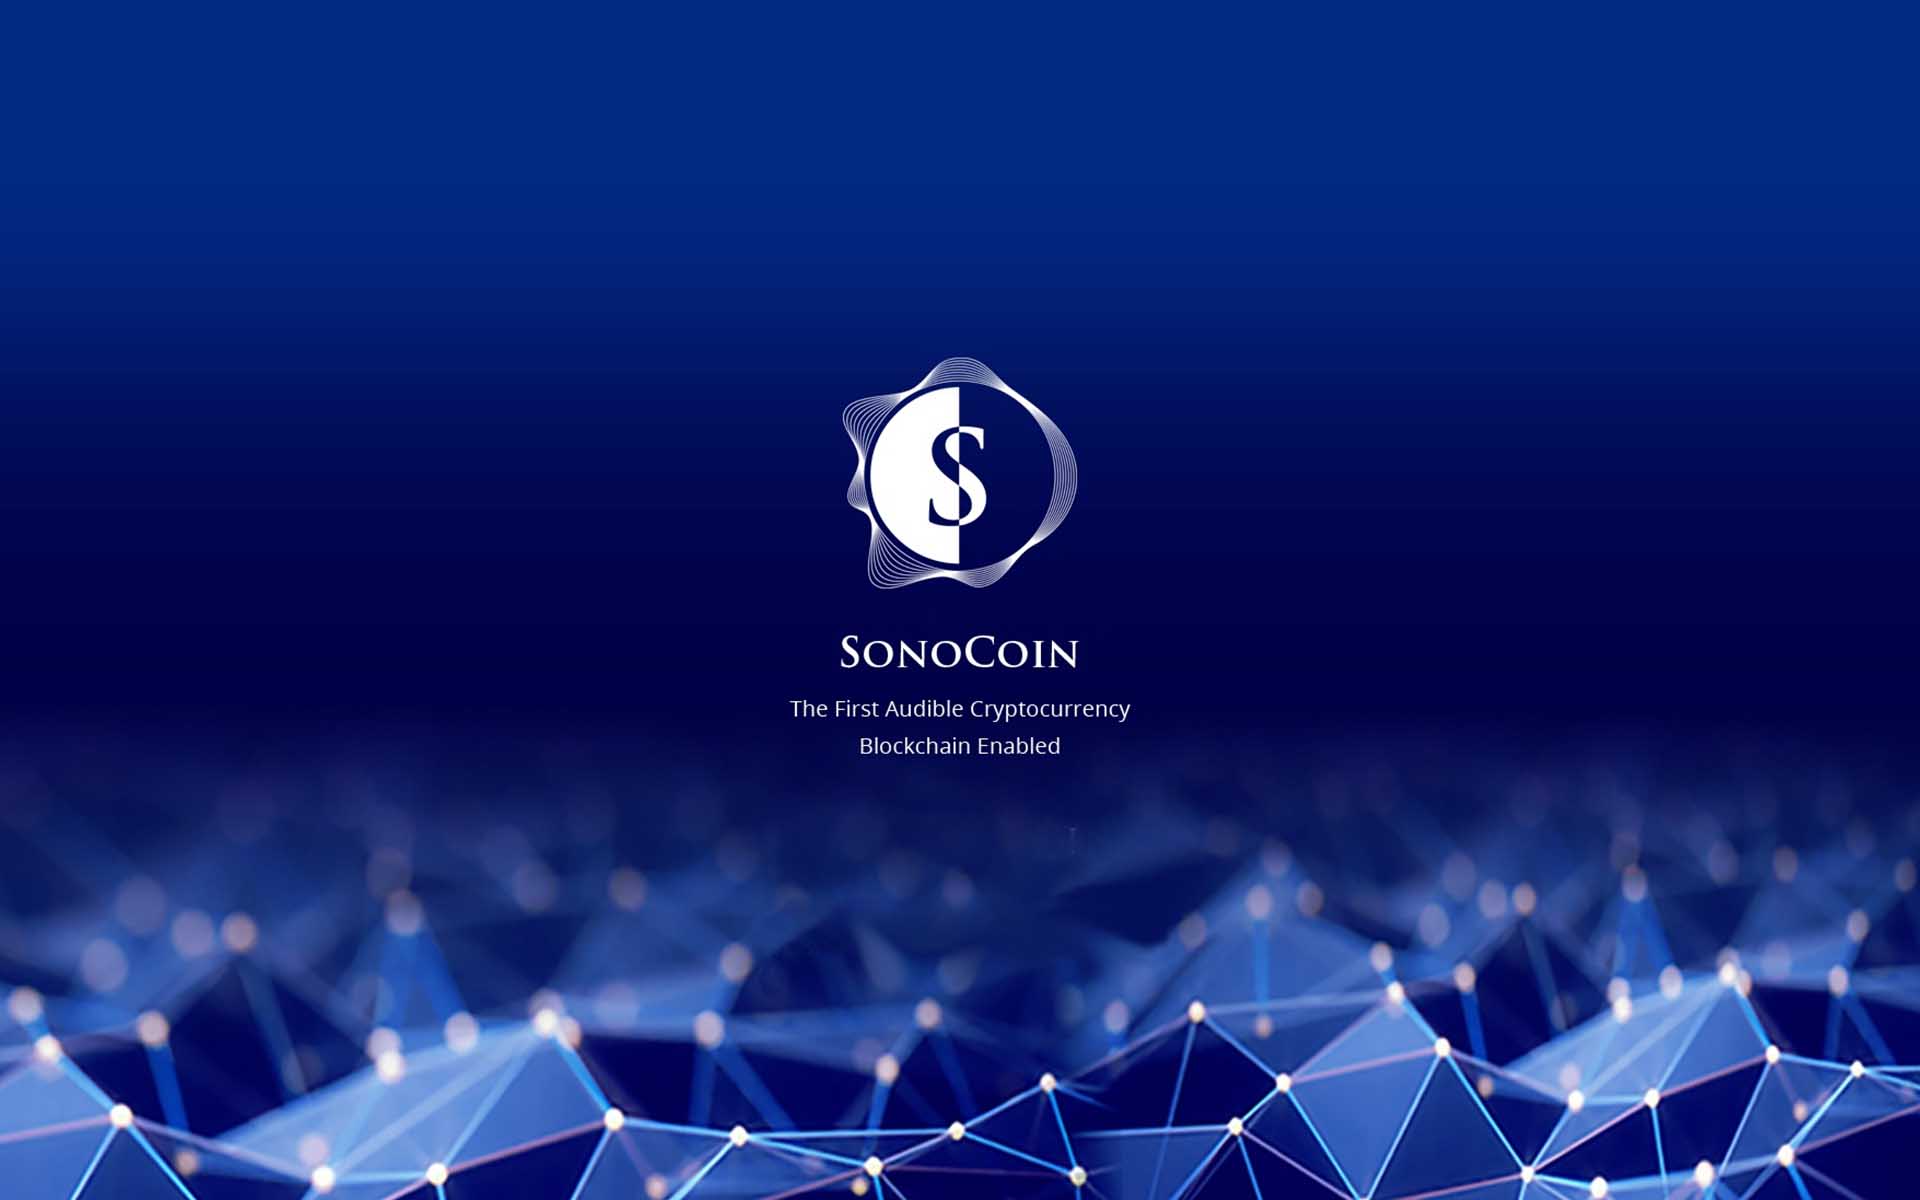 SonoCoin Rocks The Cryptocurrency World With ICO Launch & Release Of The First Ever Audible Blockchain Enabled Cryptocurrency